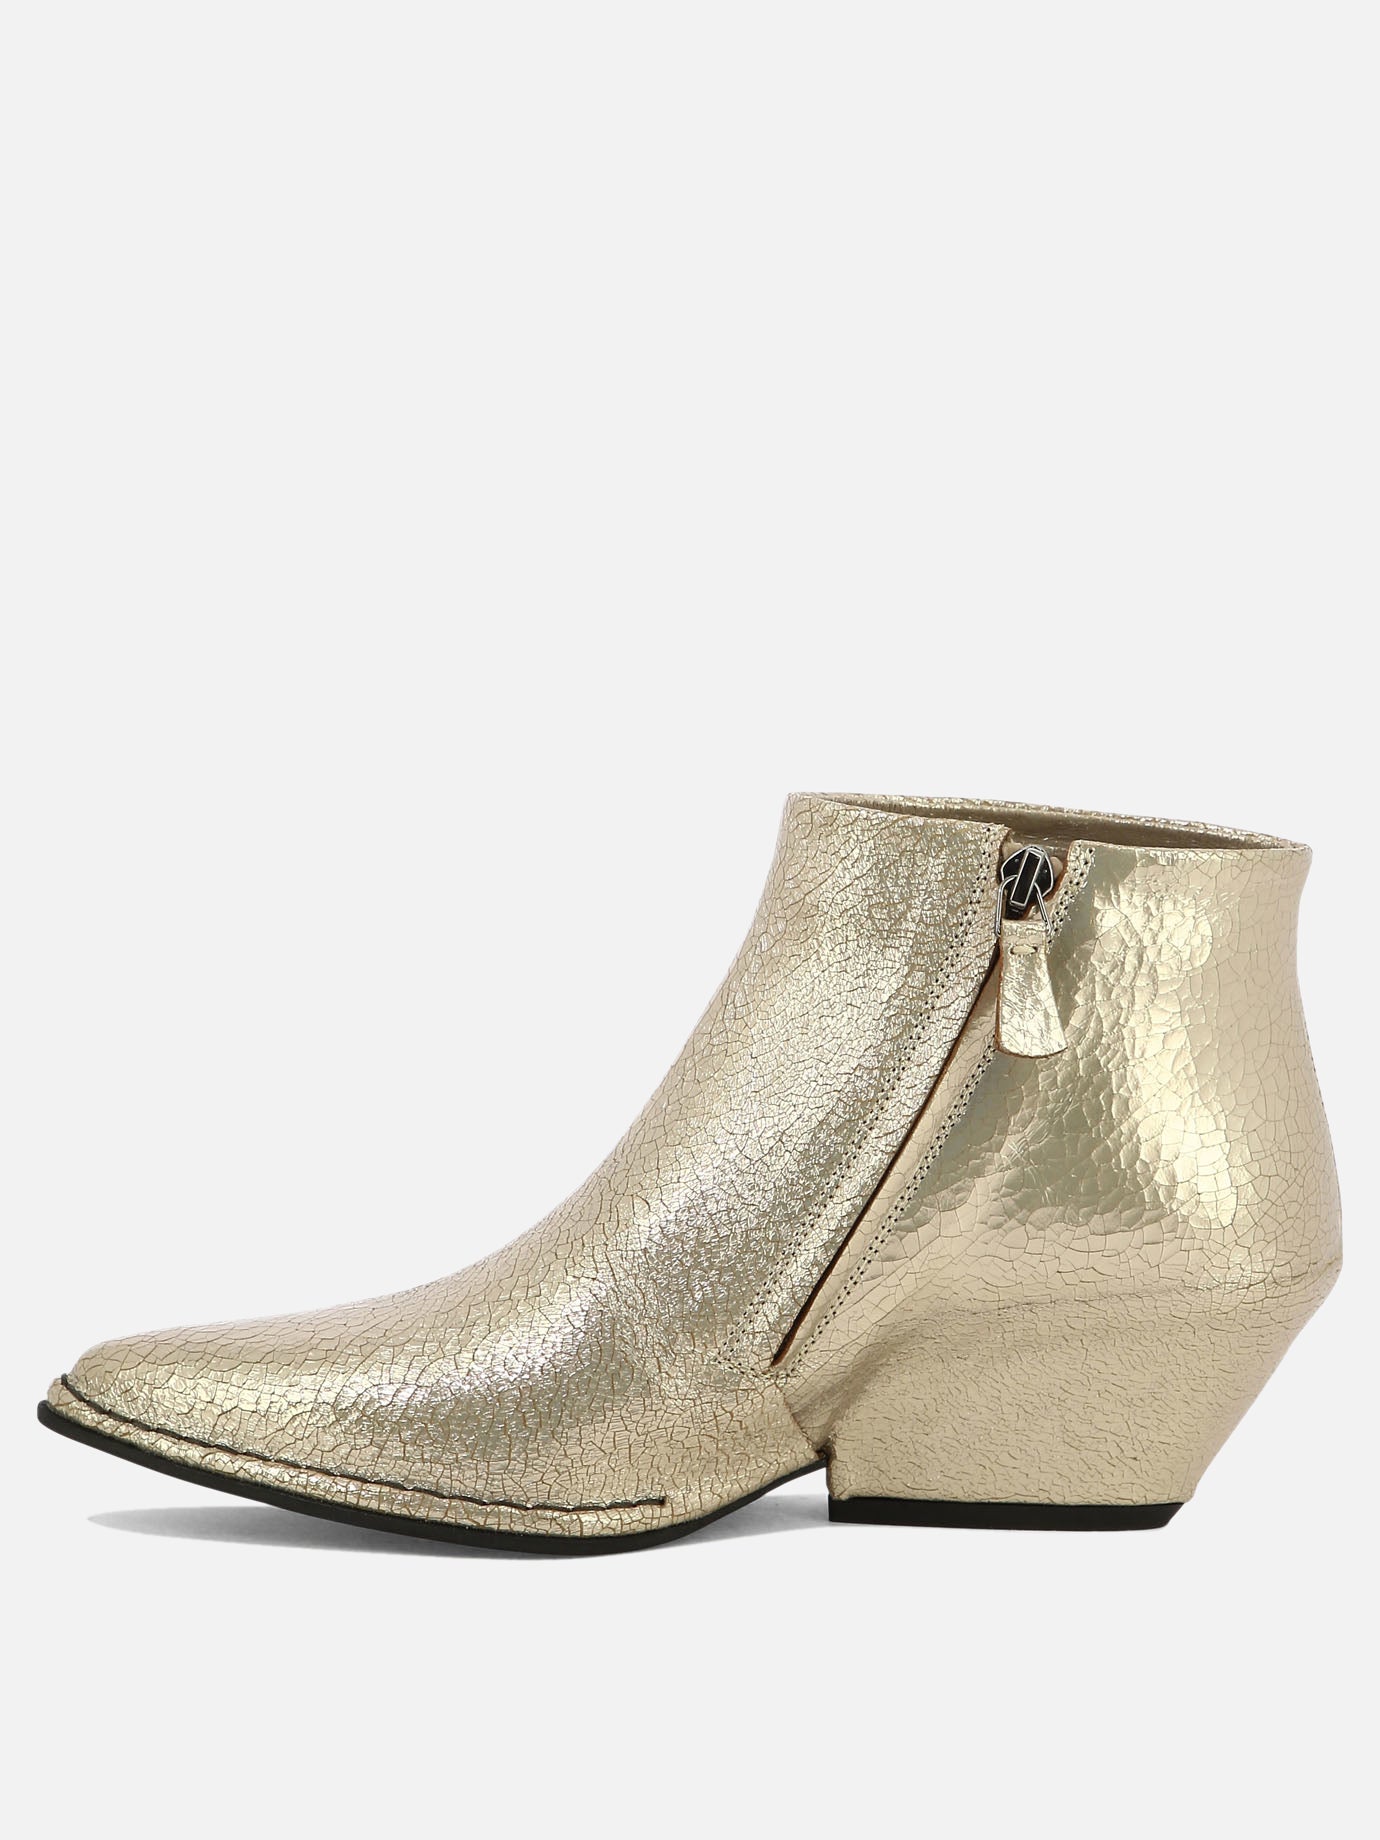 "Crio" ankle boots